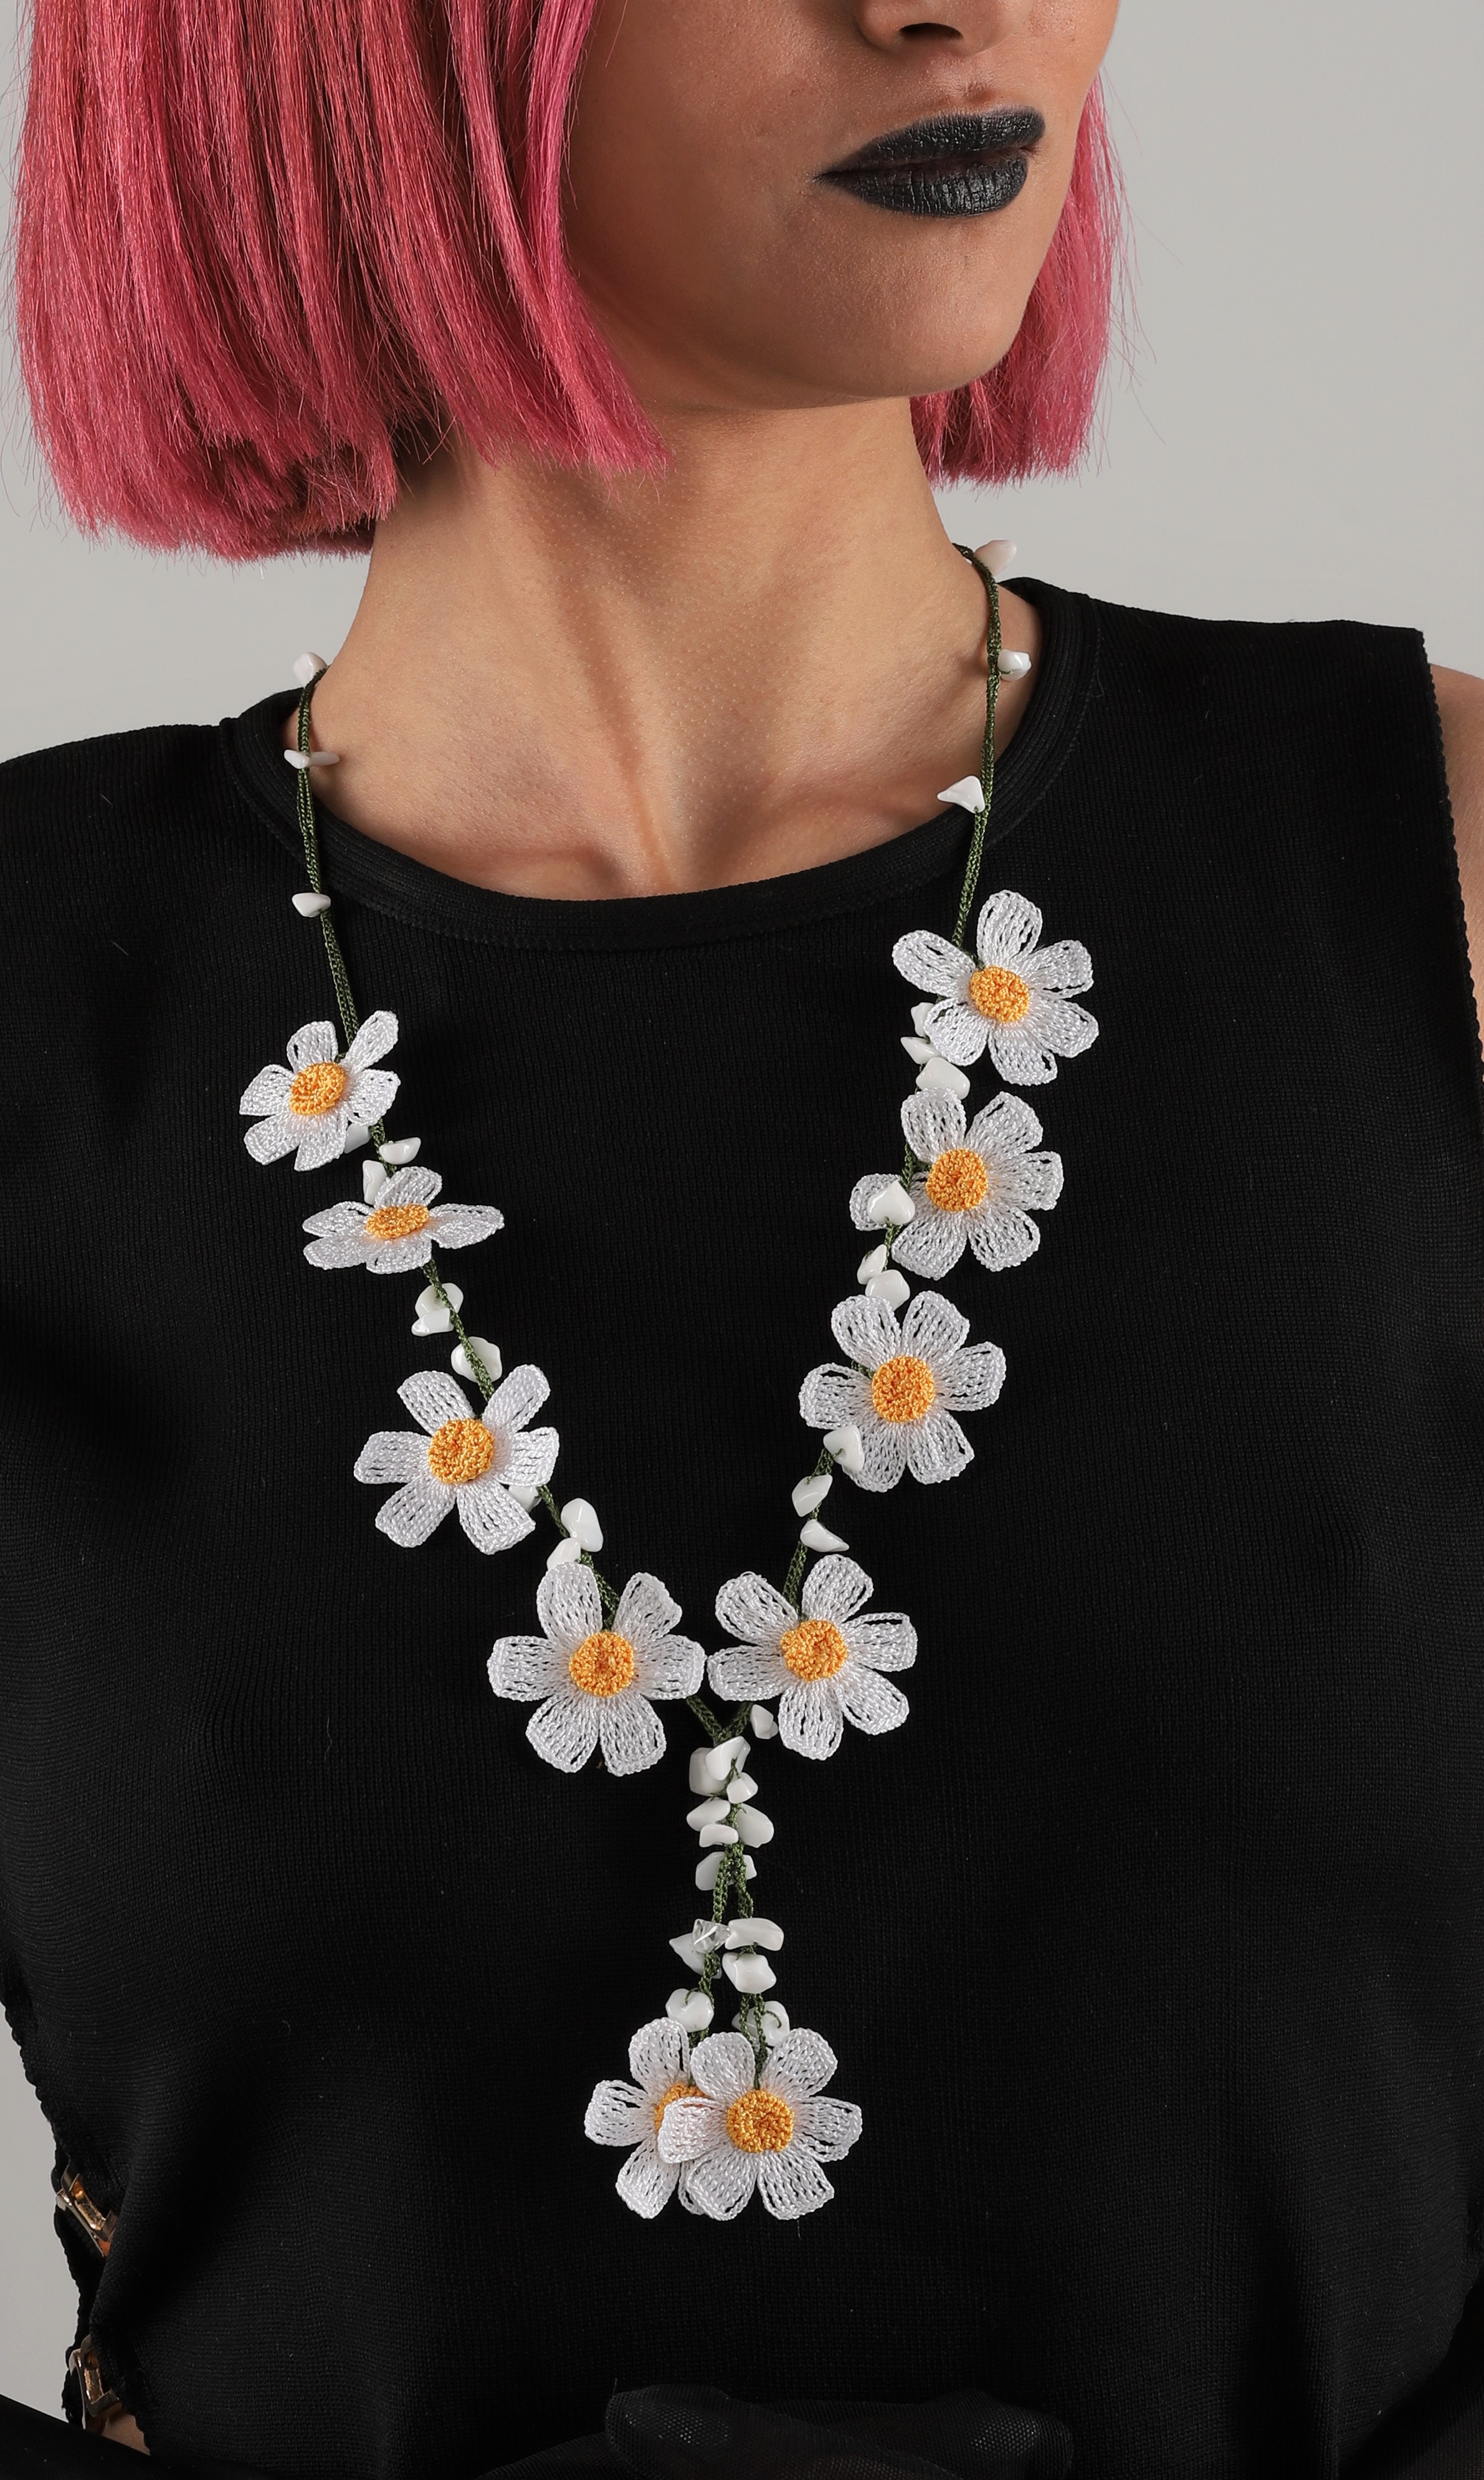 Gothic romance white & yellow Lace Daisy necklace